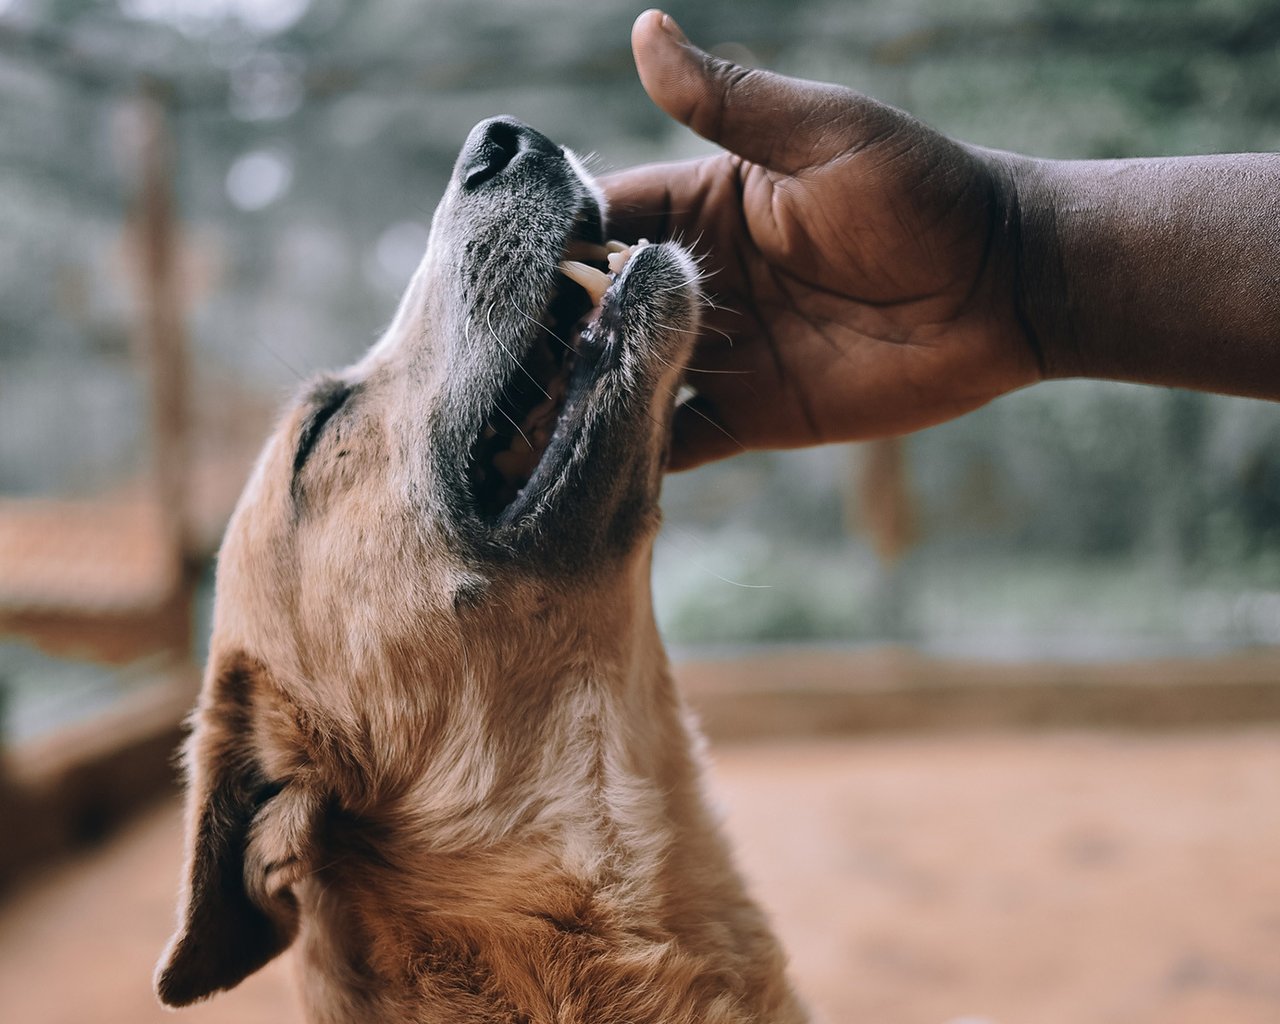 Dog being petted in Kenya - World Animal Protection